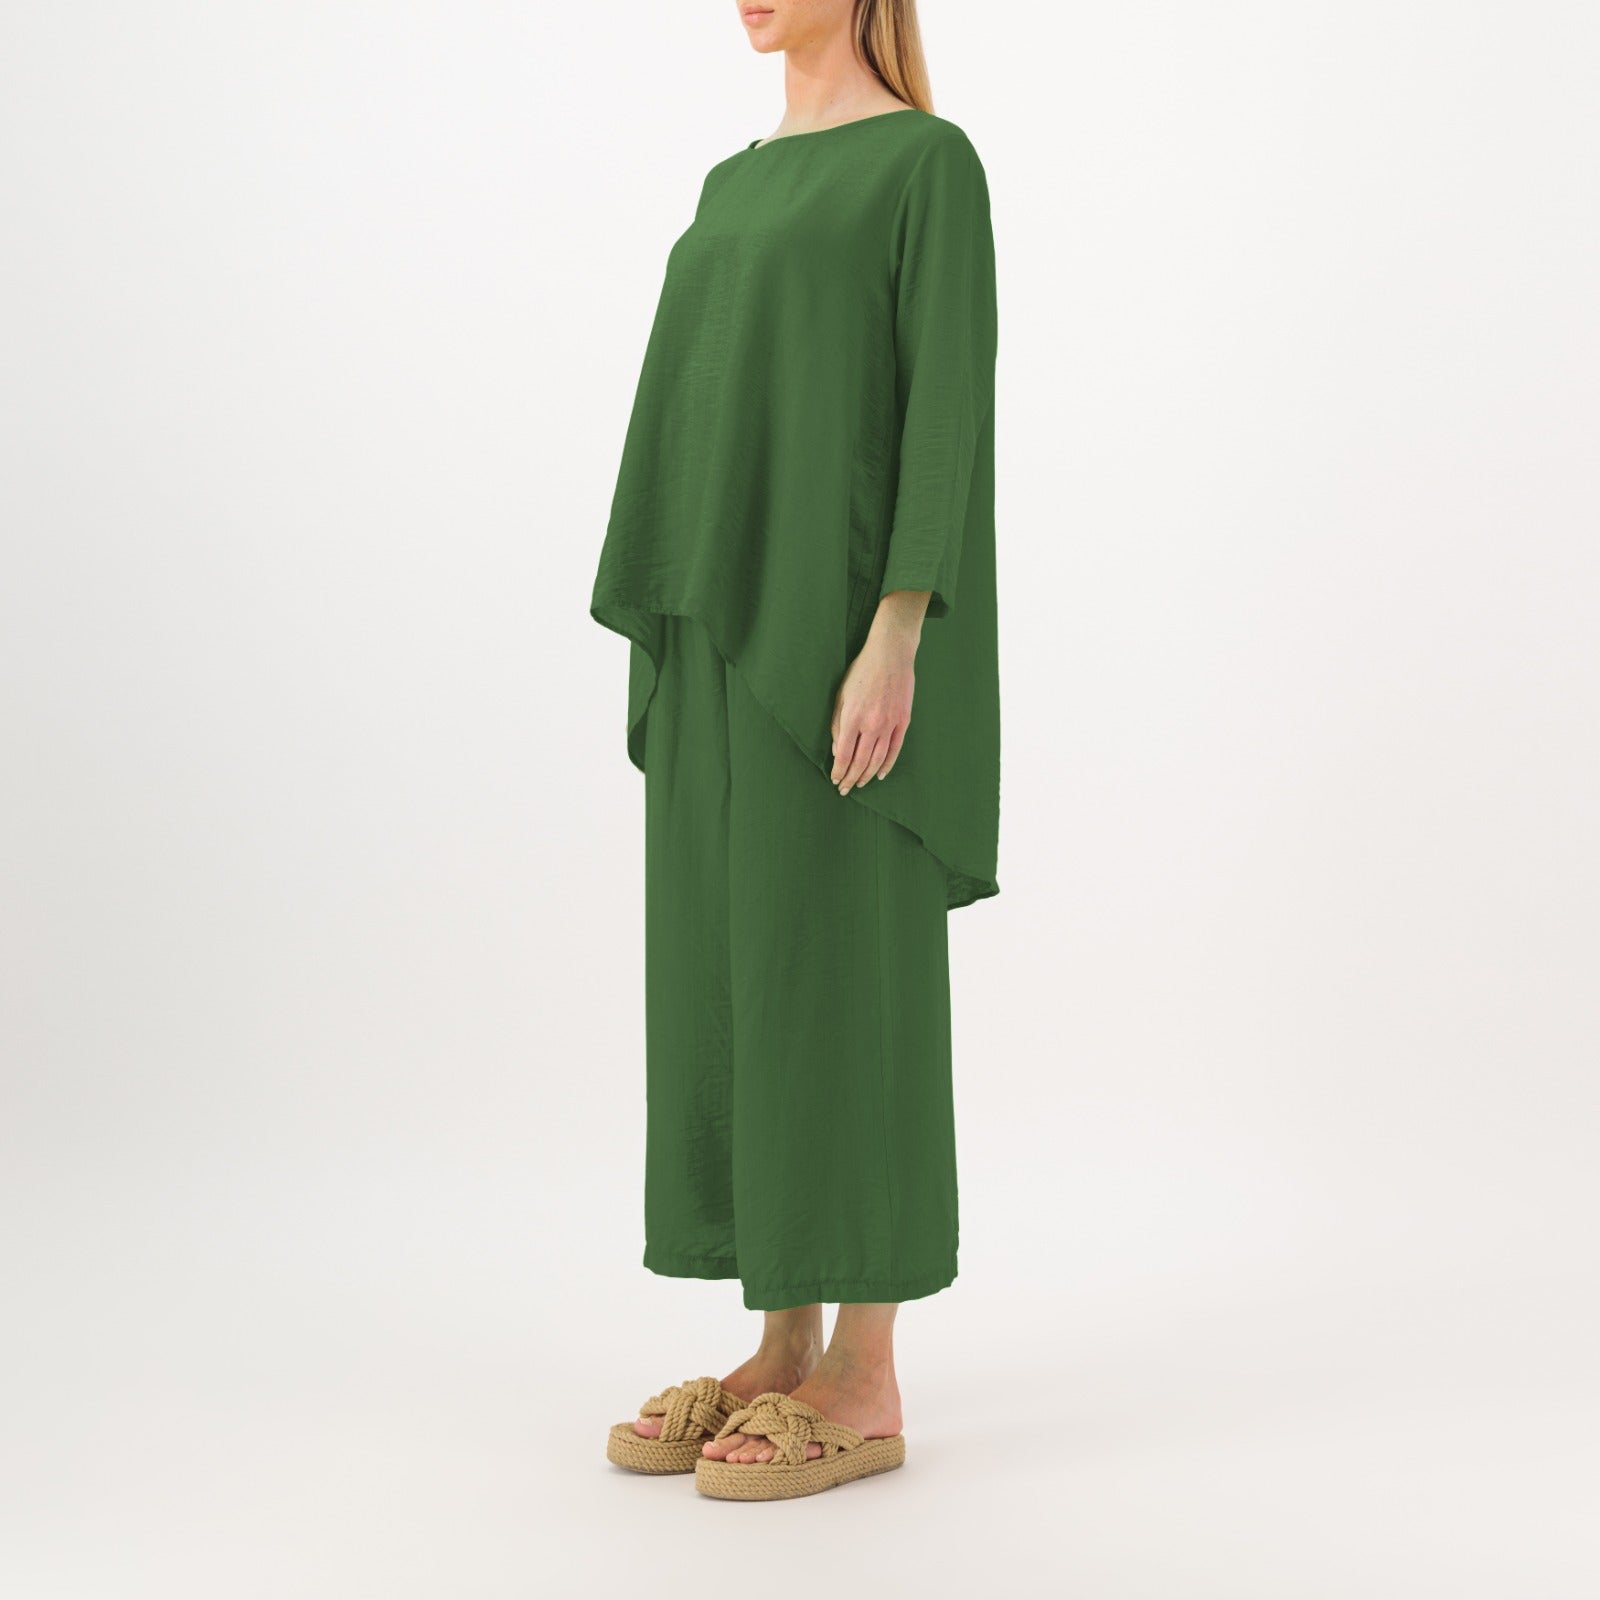 Jungle Green | All Day Closet Set of 2 - Comfortable style in attractive colors -arabian outfit - casual setcasual set - all day outfits - closet fashion store